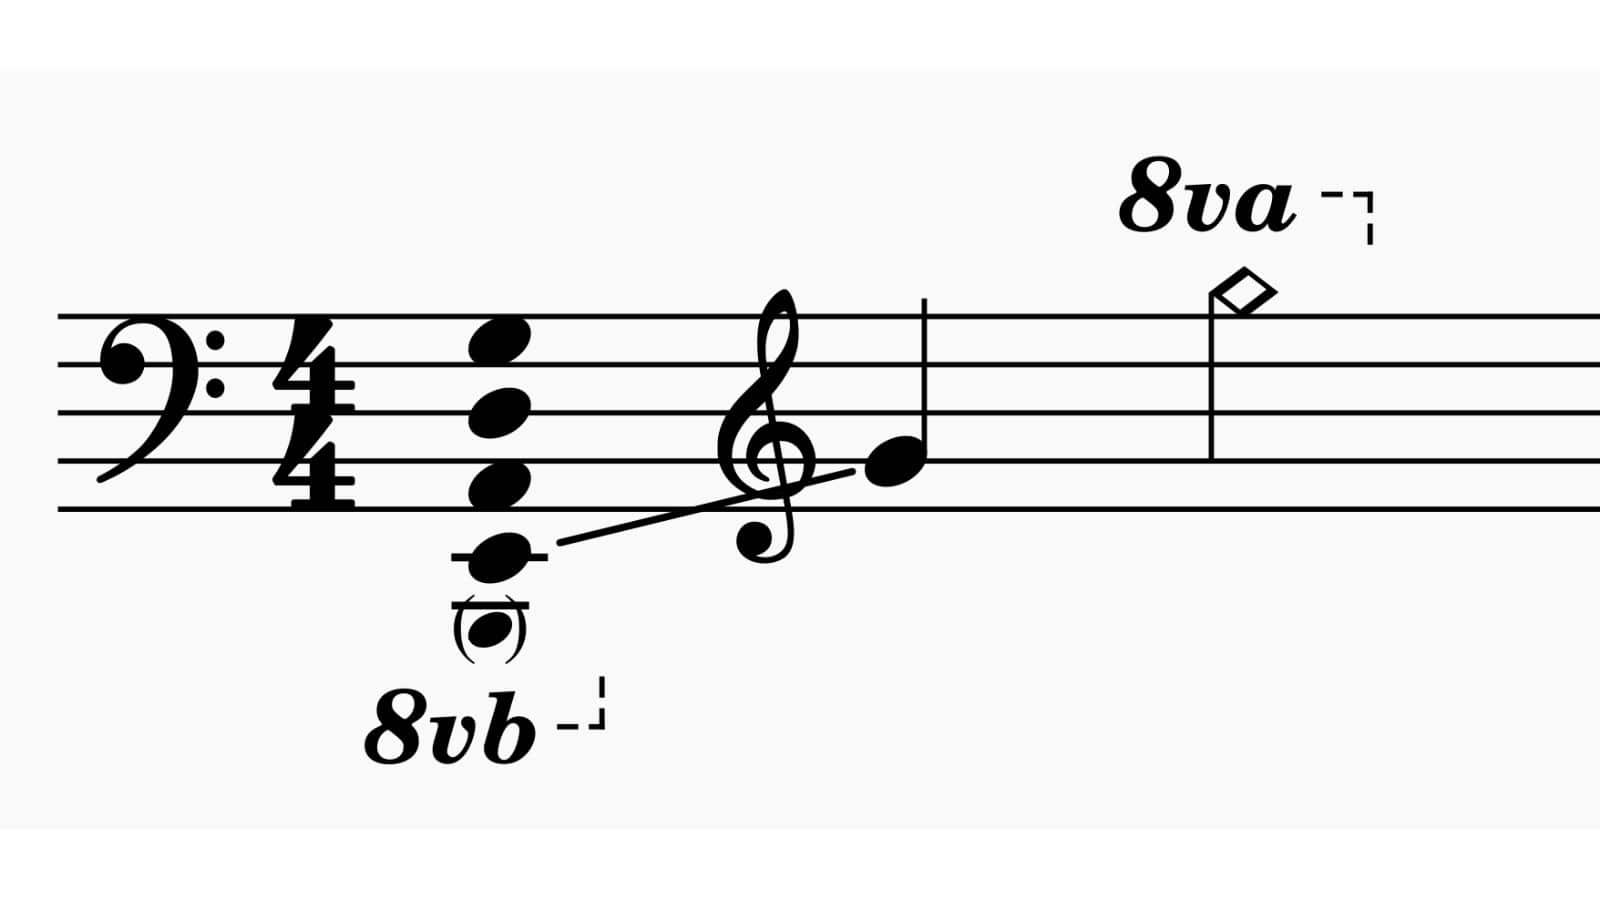 Bass guitar range with five-string bass in brackets